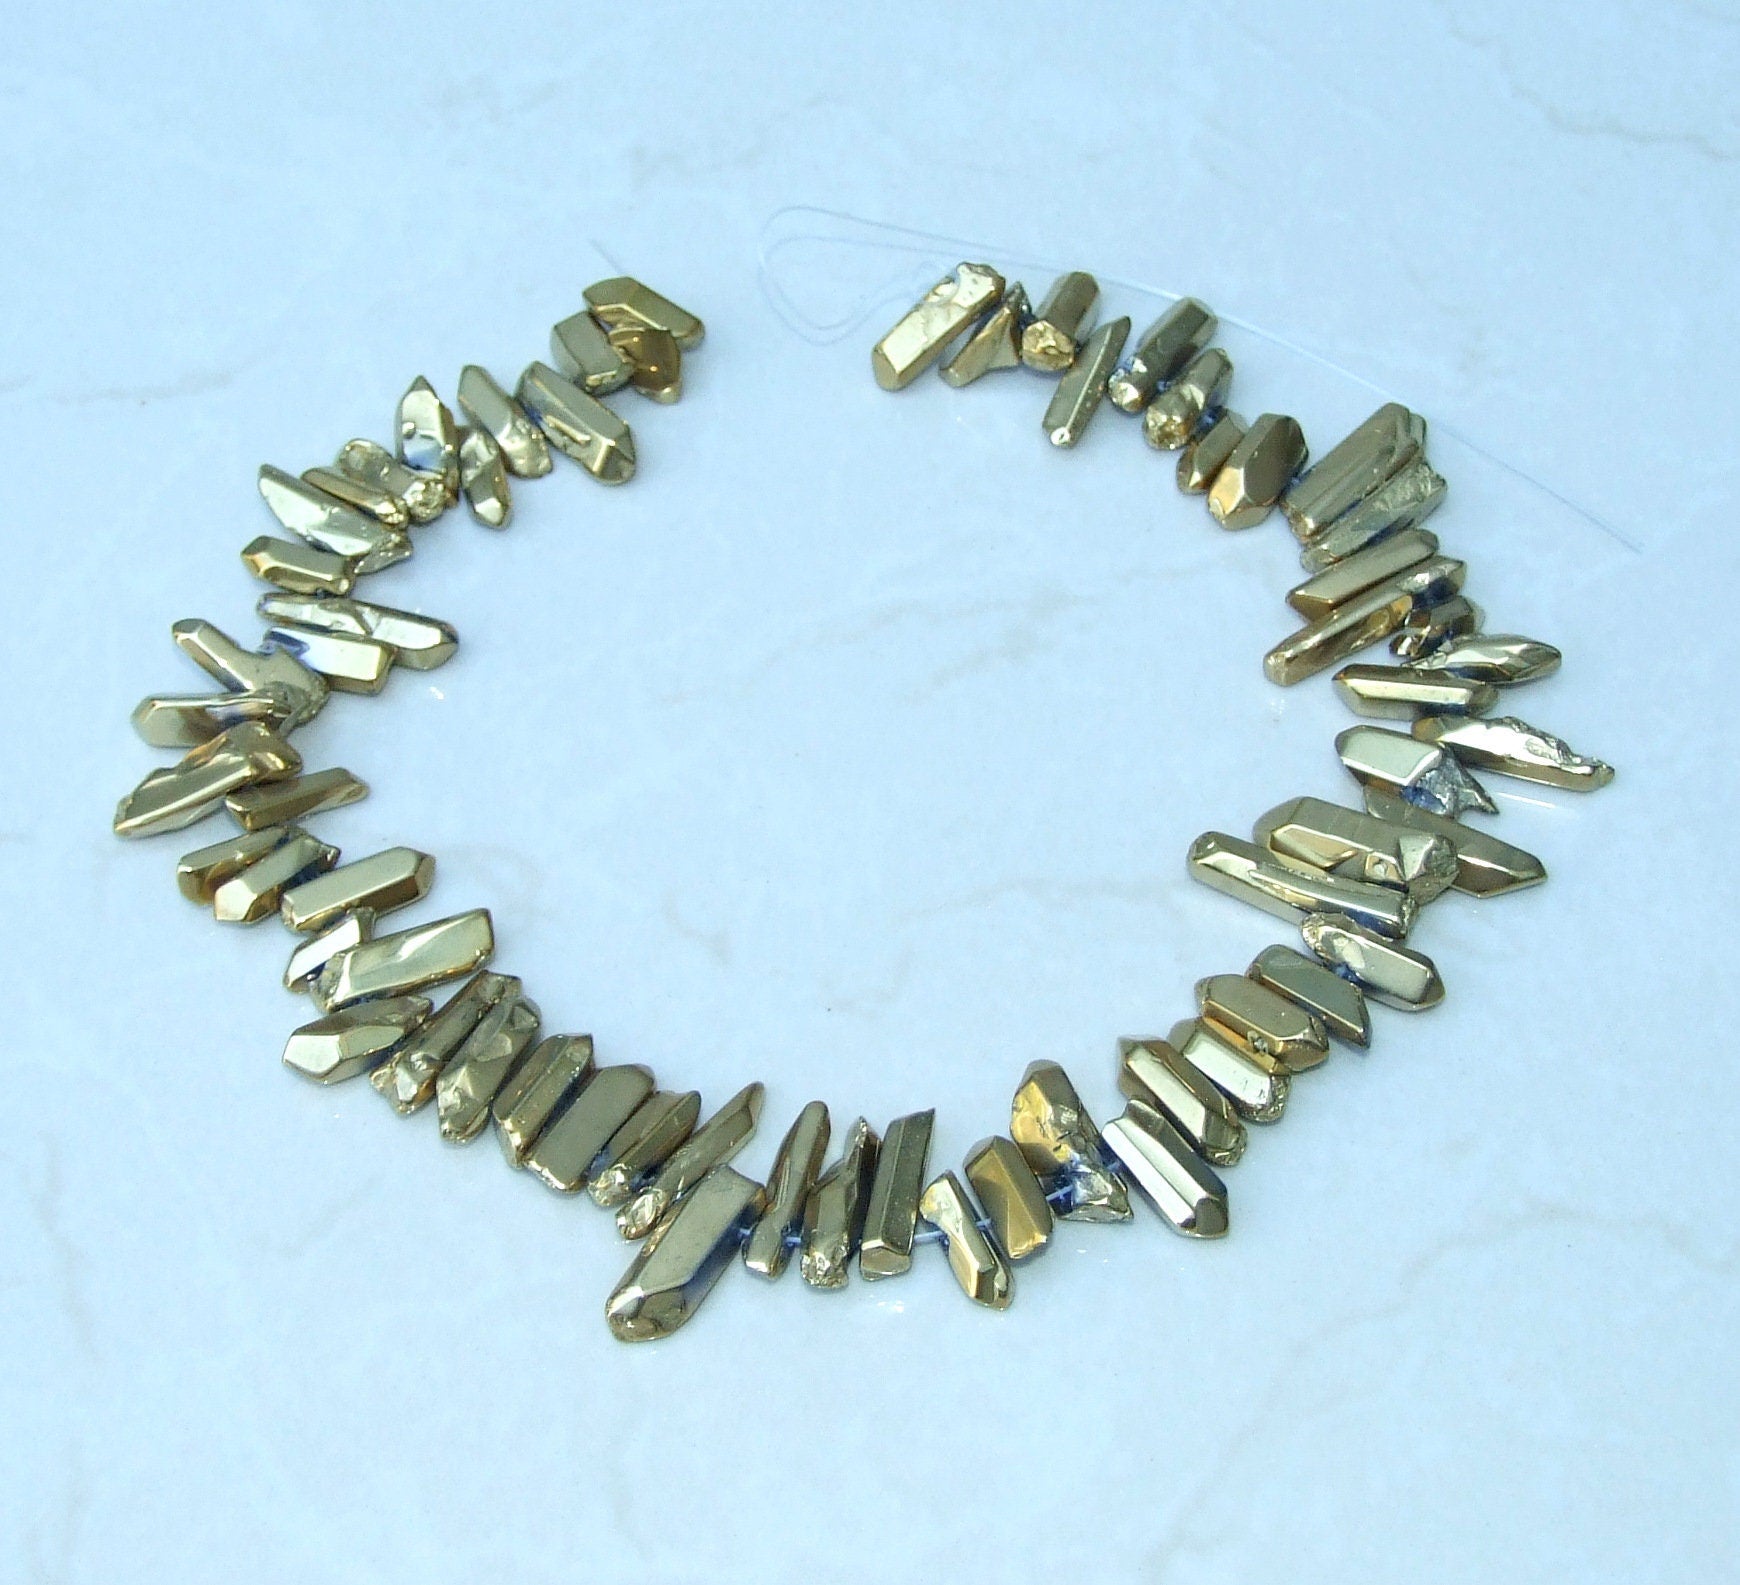 Polished Gold Titanium Quartz Cluster Point, Random Quartz Point Strand, Quartz Points Drilled, Quartz Crystals Points Strand Beads, 15-30mm